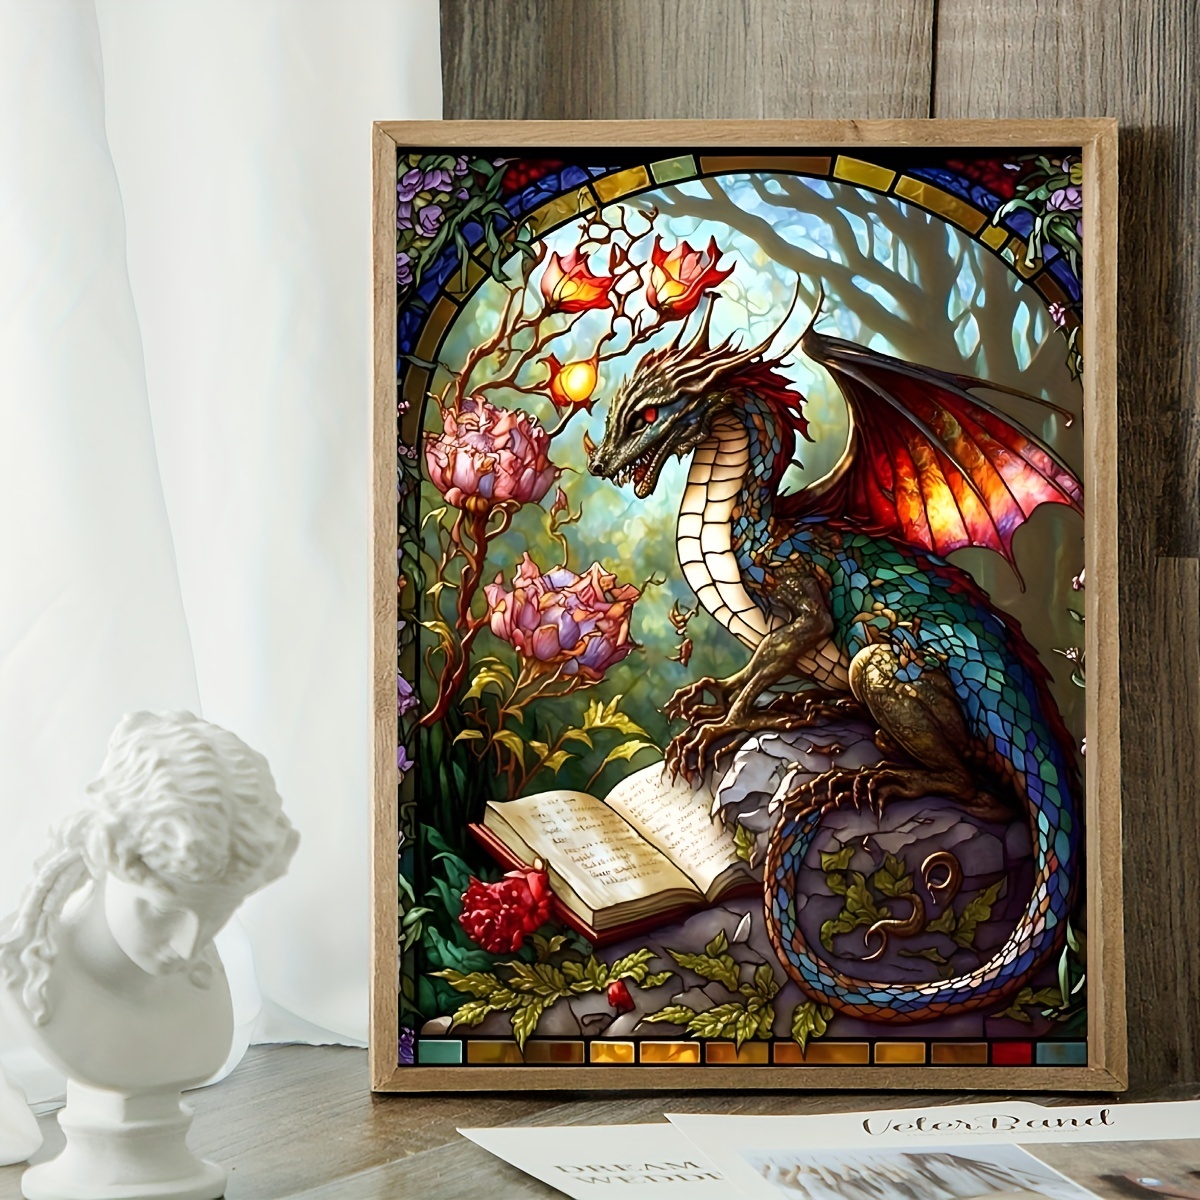 Eleploi Stained Glass Dinosaur with Wingsk Diamond Painting Kits DIY 5D  Crystal Full Round Diamond Painting, Handmade Art for Living Room Home Wall